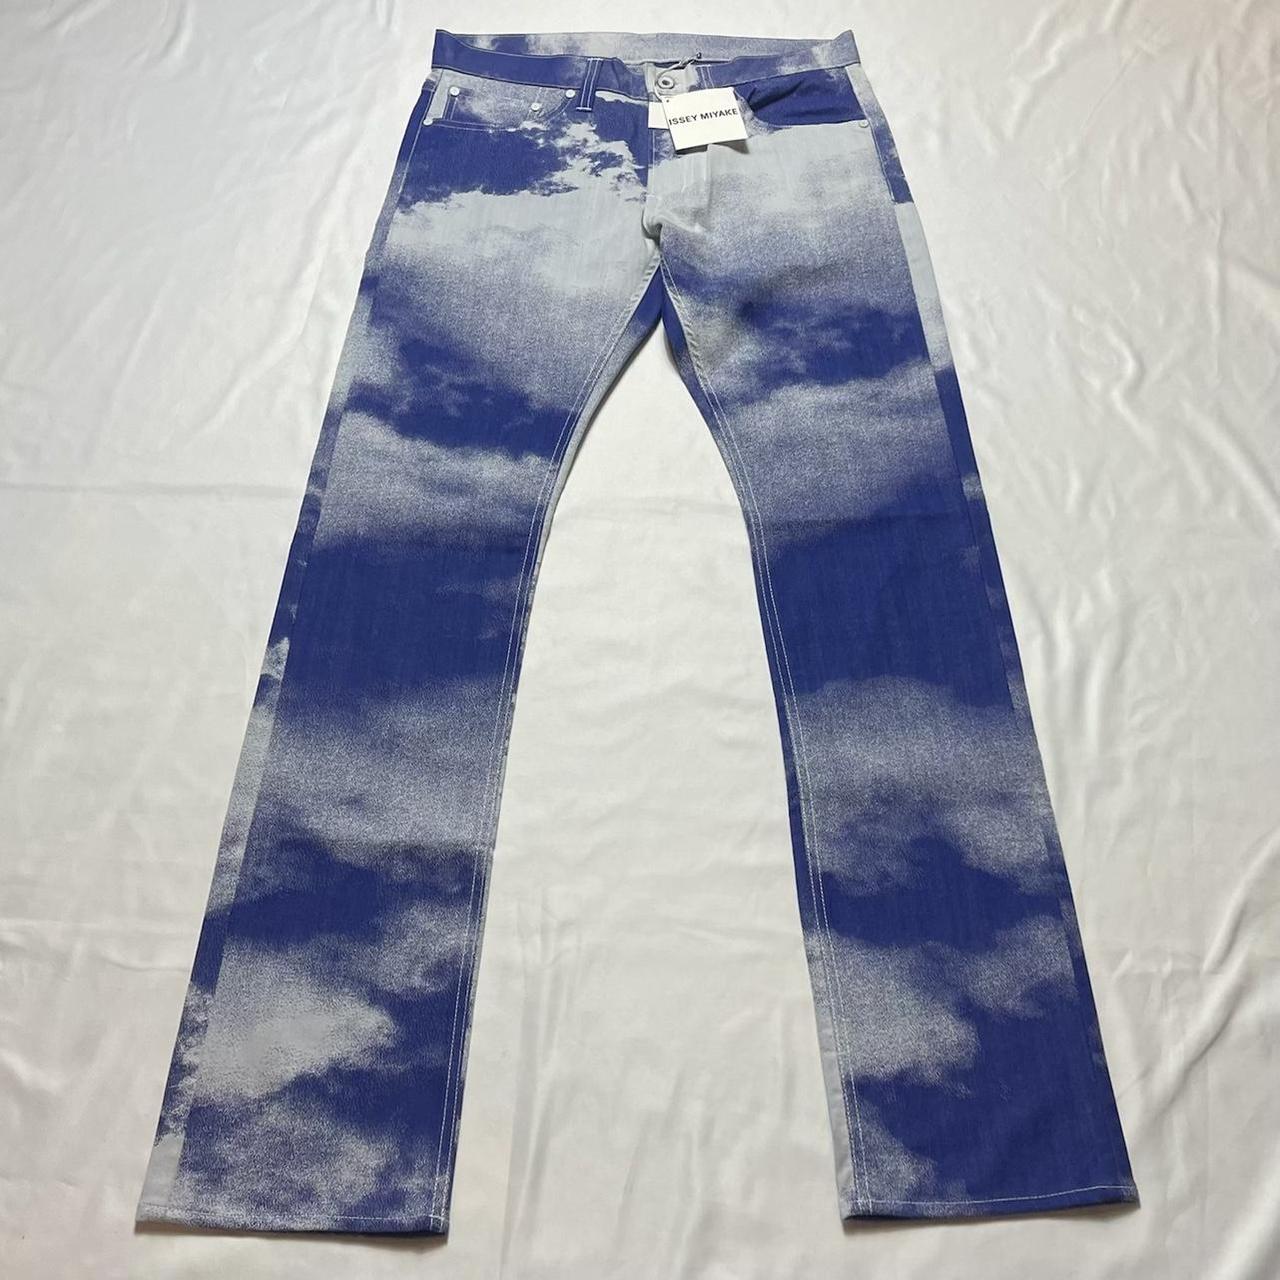 Issey Miyake Men's White and Blue Jeans